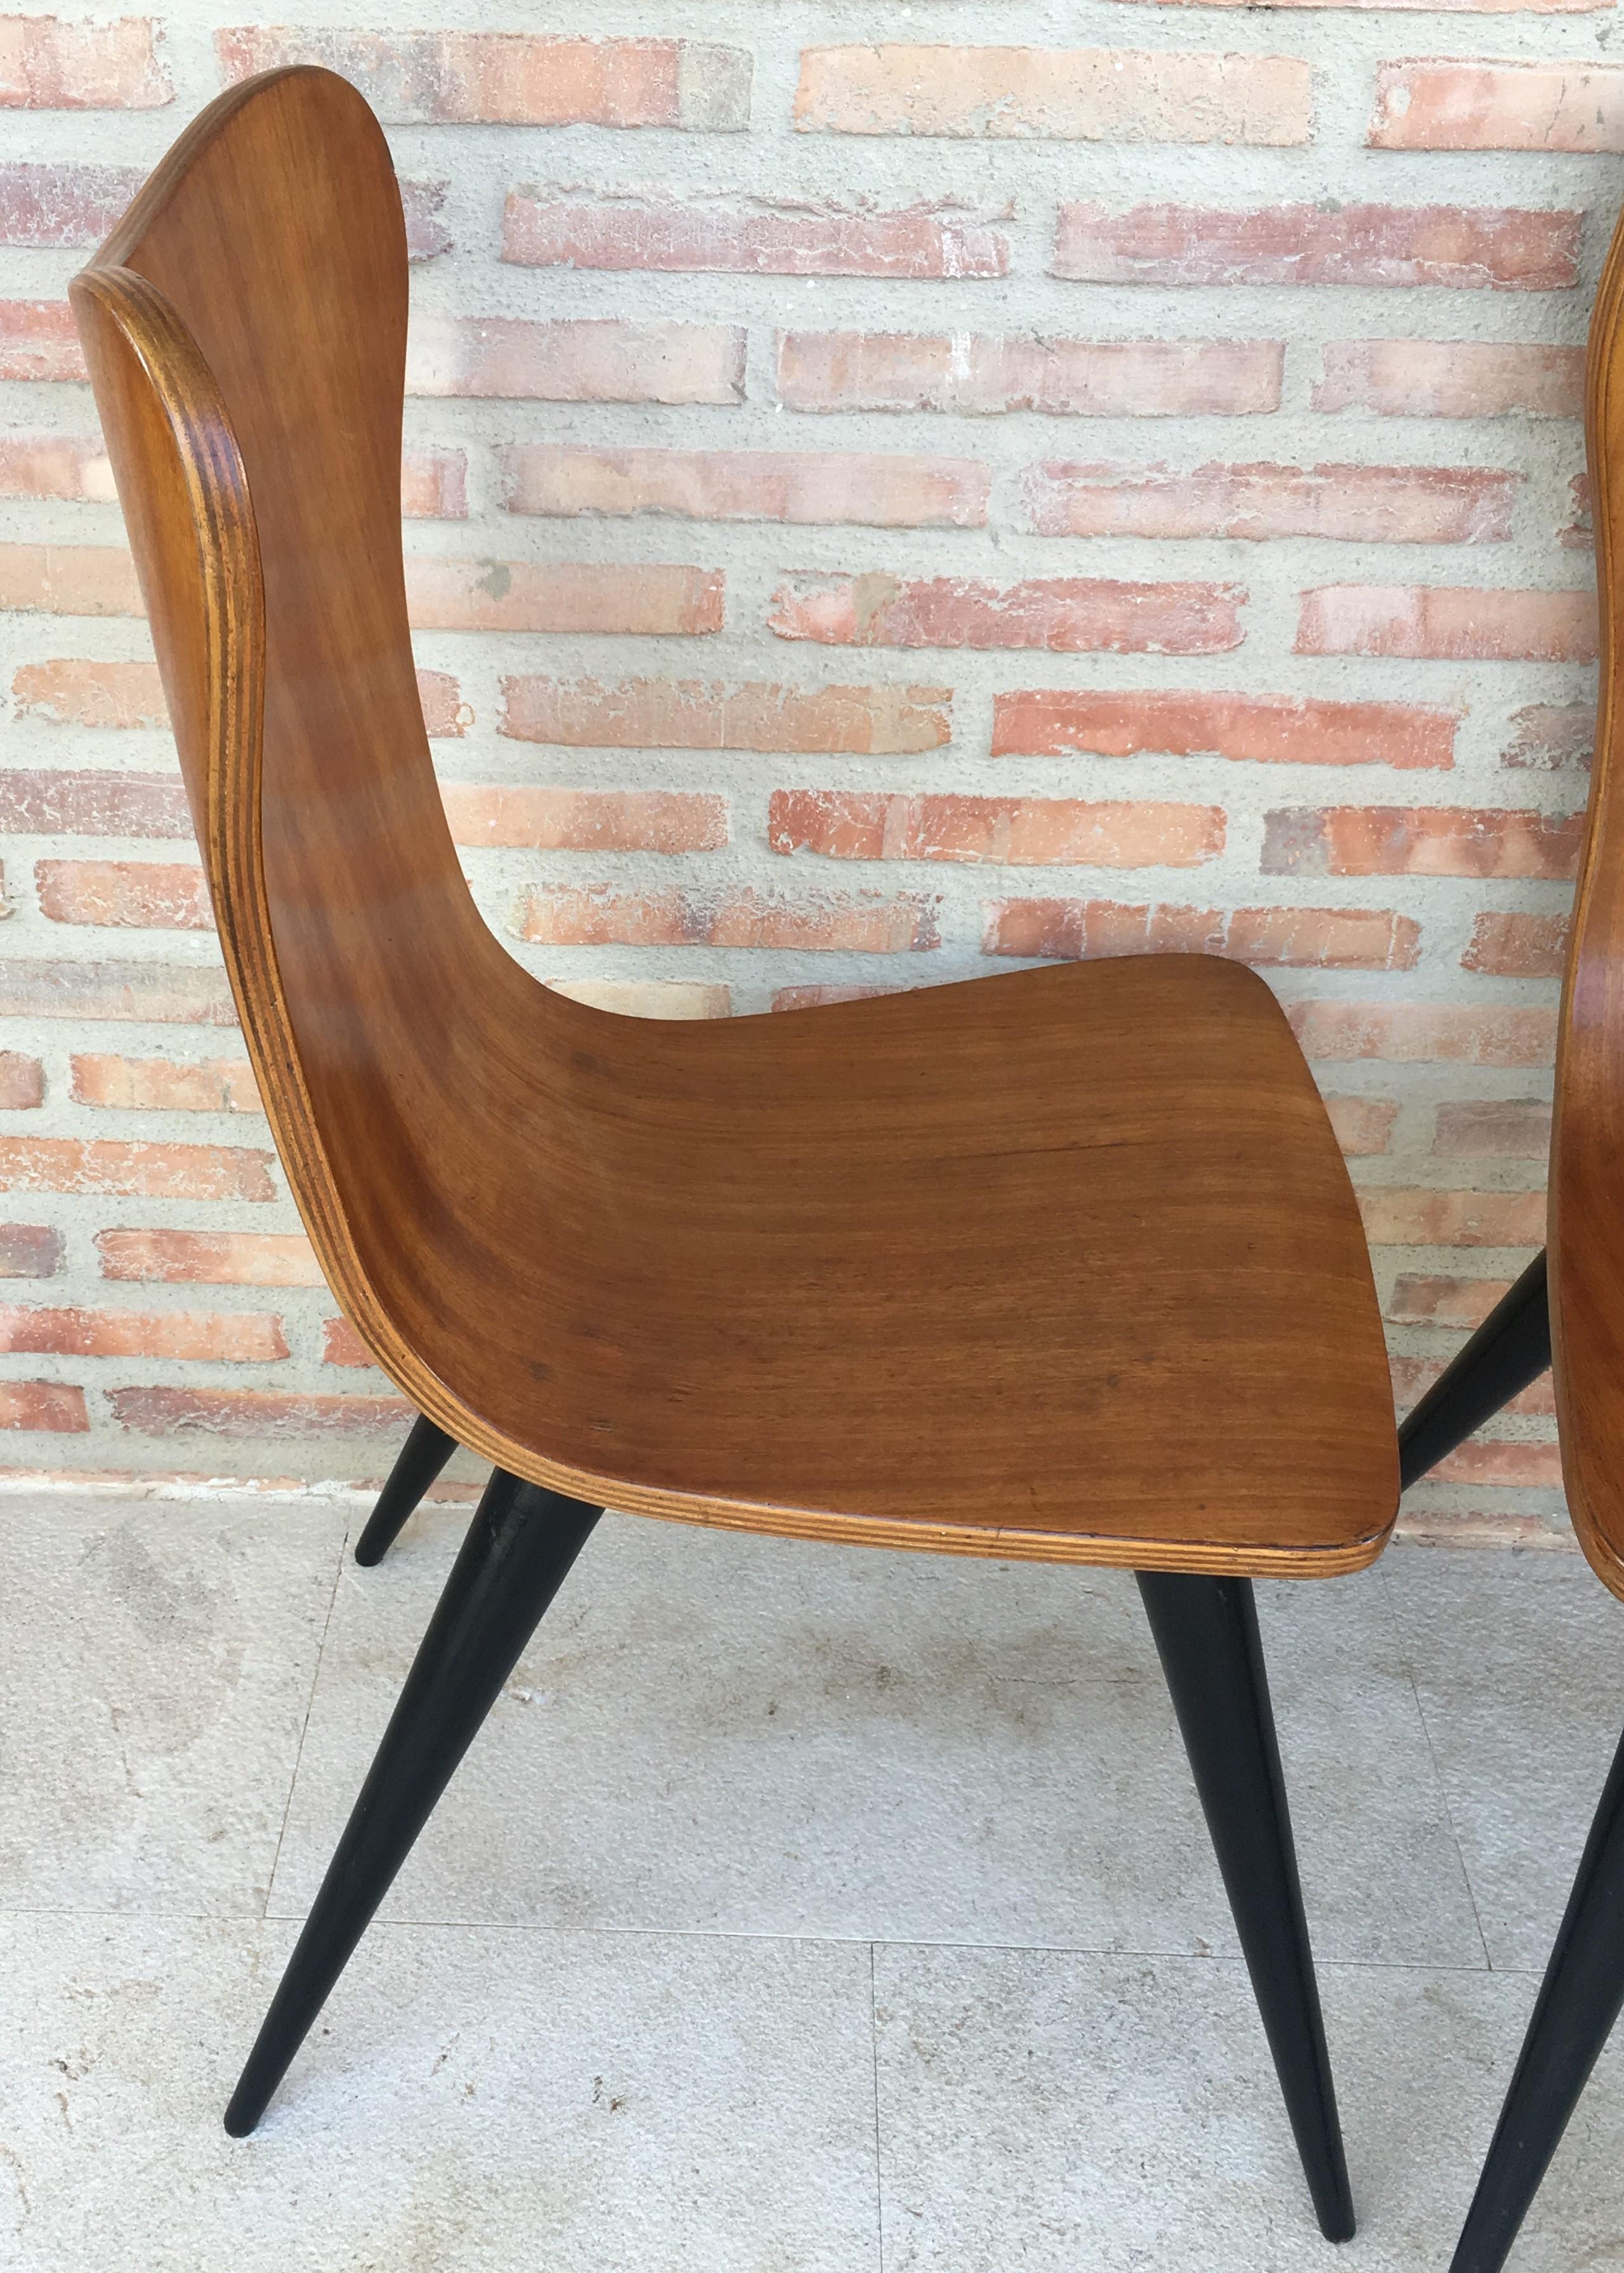 Pair of Midcentury Arne Jacobsen Style Chairs with Black Tapered Legs For Sale 2